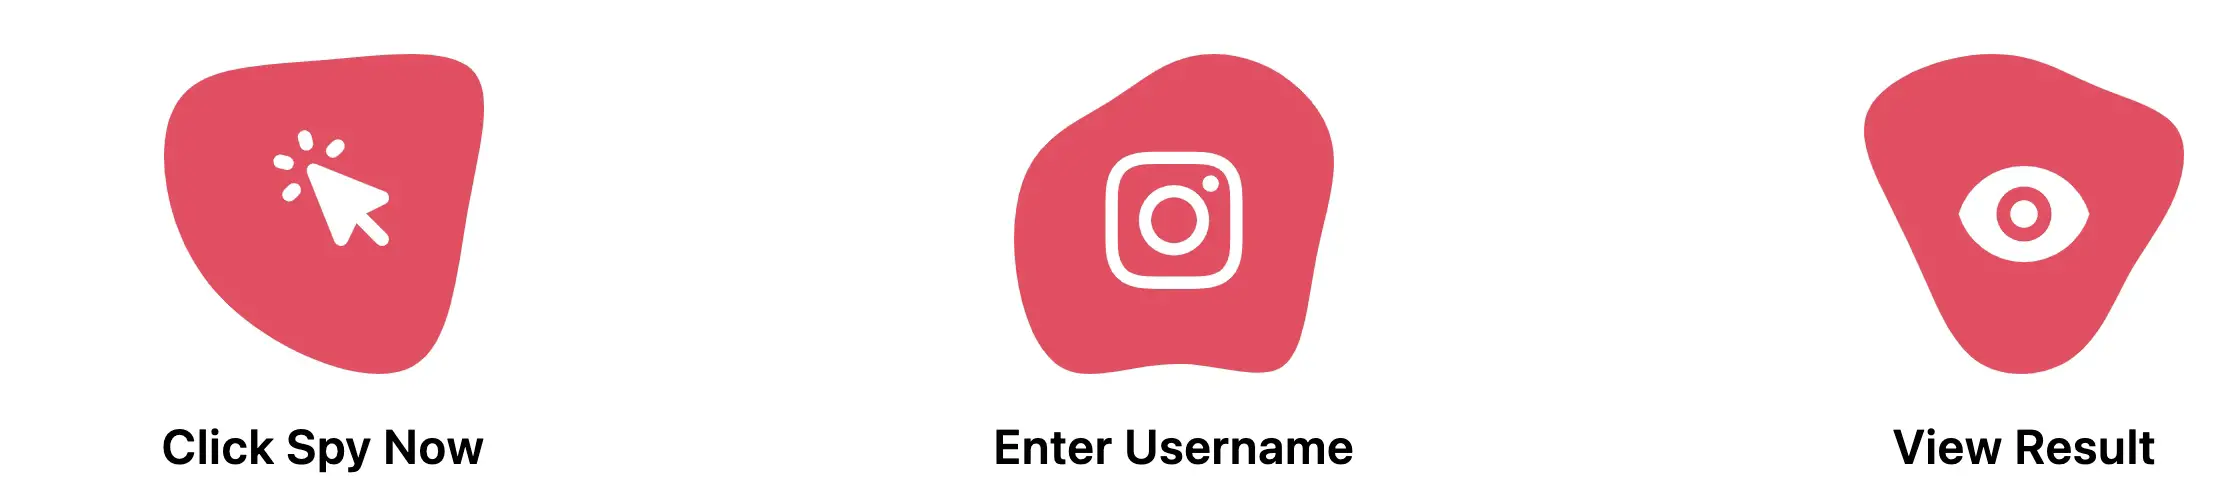 11 Of The Best Instagram Profile Viewer To Try Out